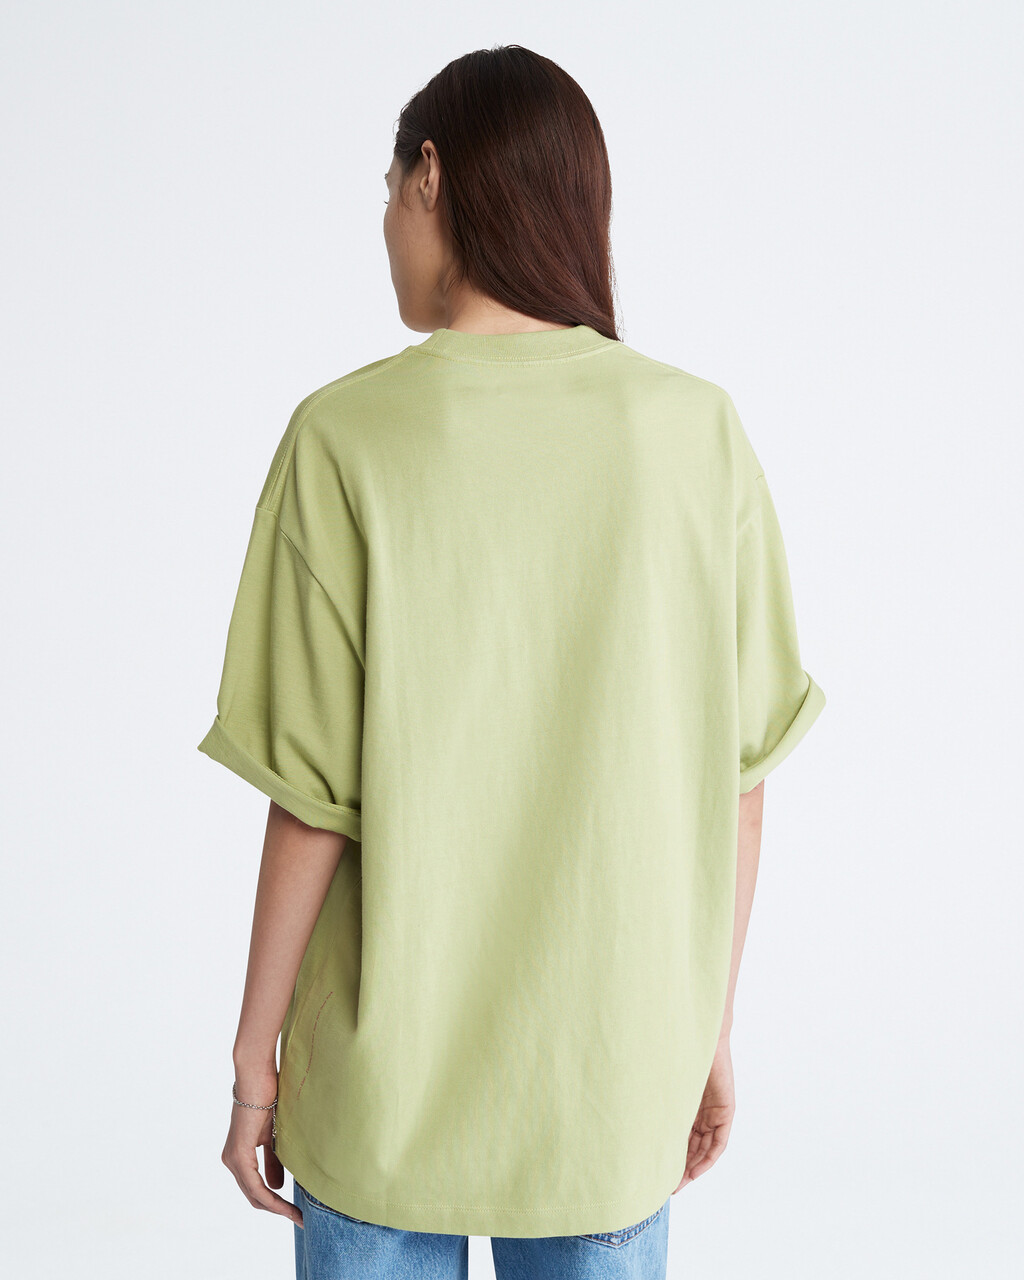 Standards Relaxed Leap Graphic T-Shirt, Sweet Pea, hi-res